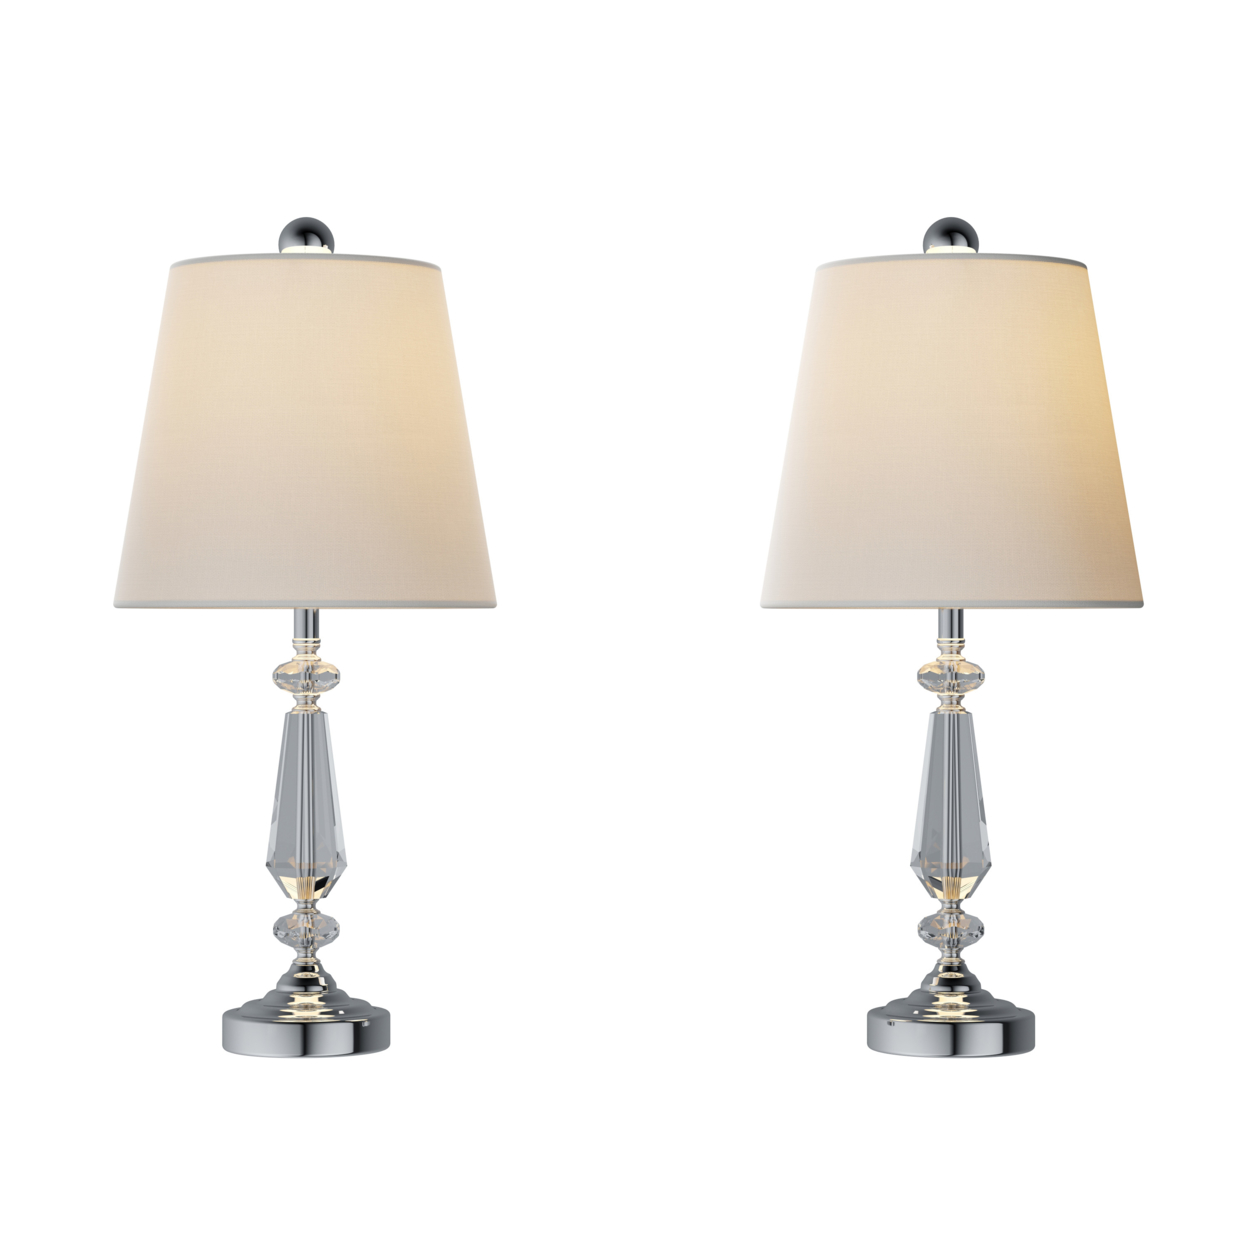 Crystal Candlestick Lamps-Set Of 2 Faceted Shiny-2 Matching Table Lamps-Elegant, Modern Accent Lights